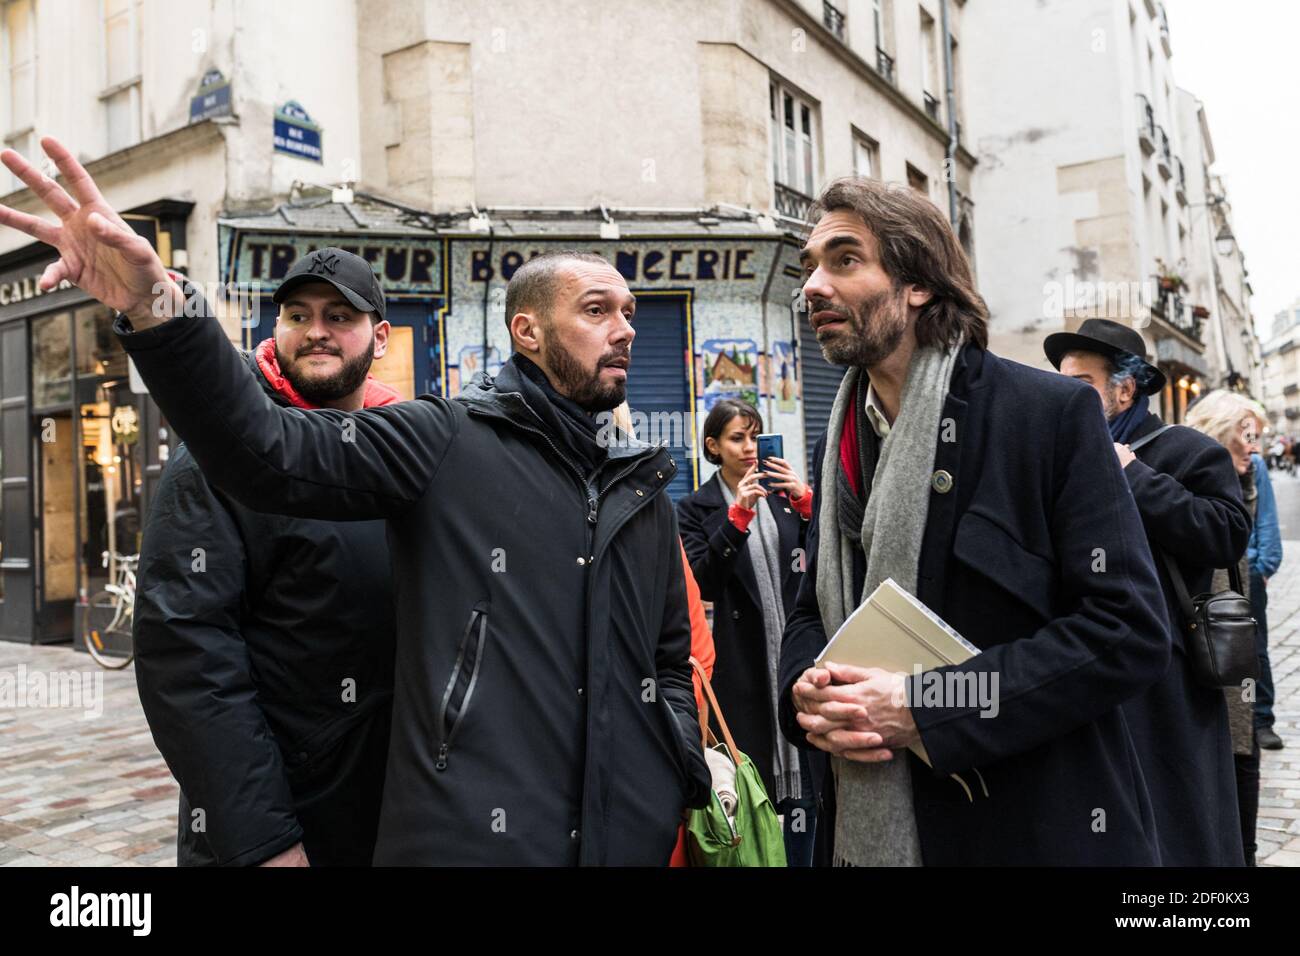 Cedric Villani (R.), dissident candidate from La Republique en Marche  (LREM) as mayor of Paris, talks with a worker from l'As des Falafels during  his visit to the shops of the Rue